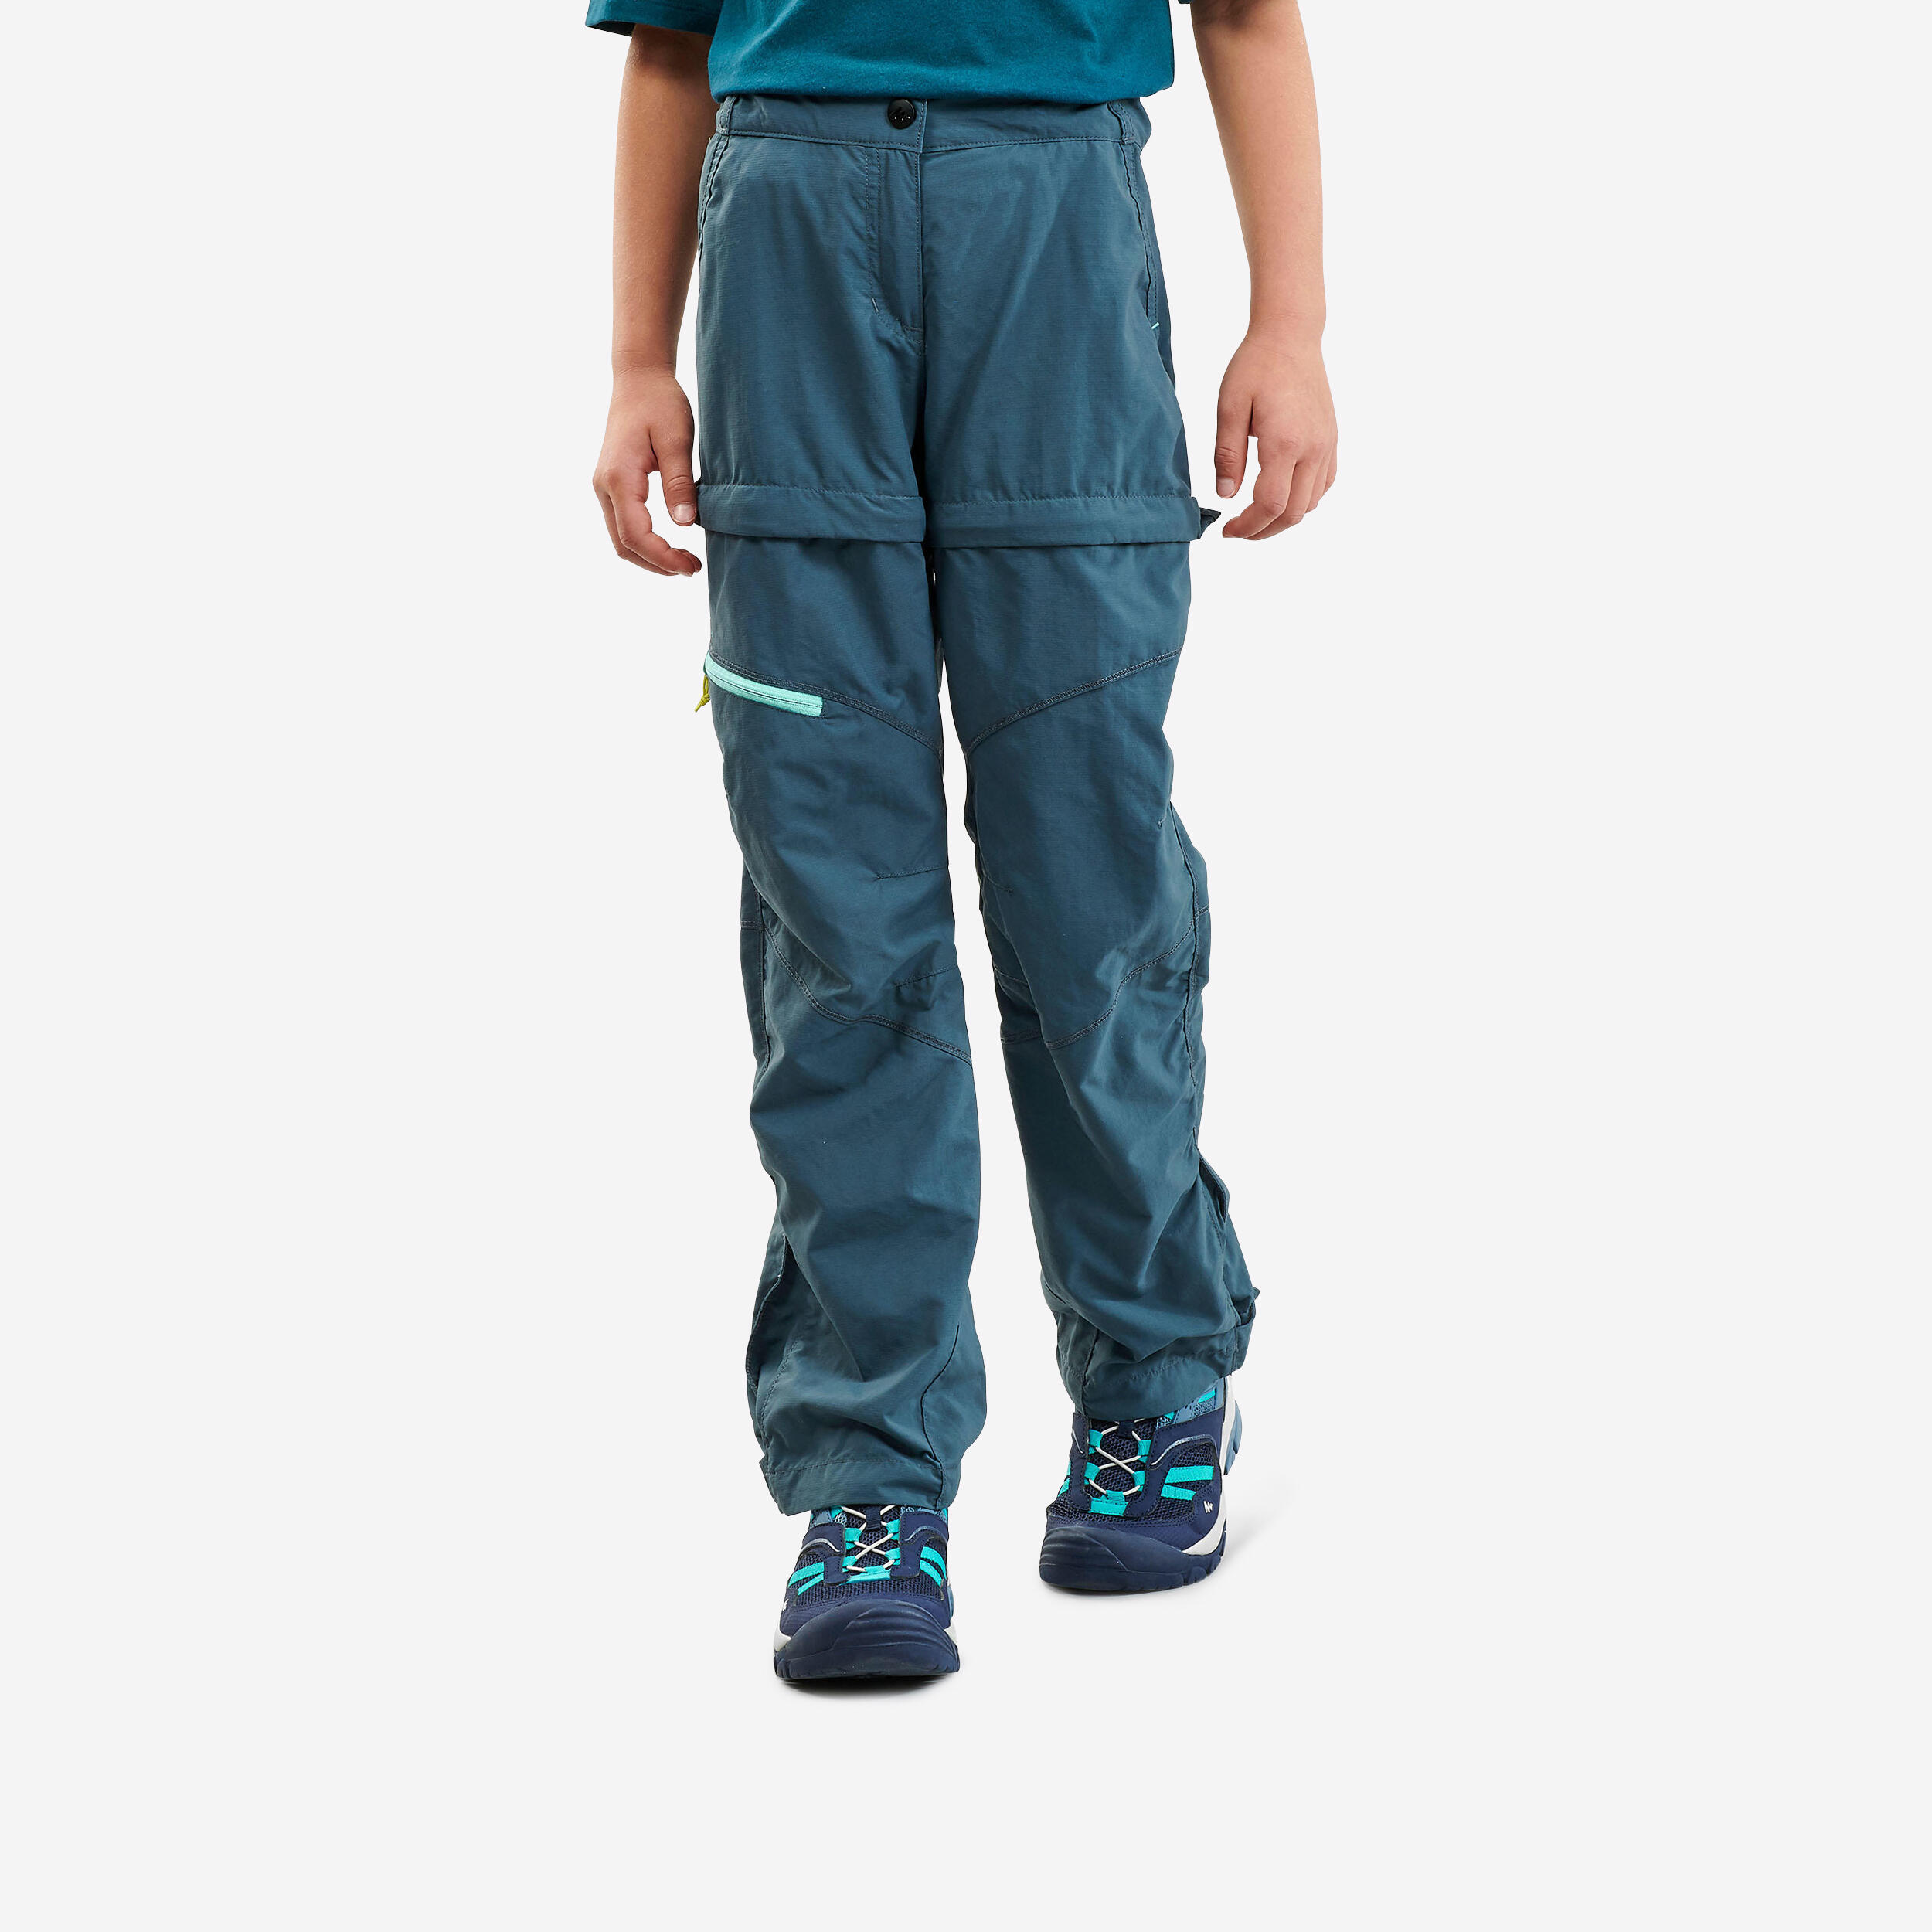 Quechua Kids’ Modular Hiking Trousers MH500 Kid Aged 7-15 Turquoise